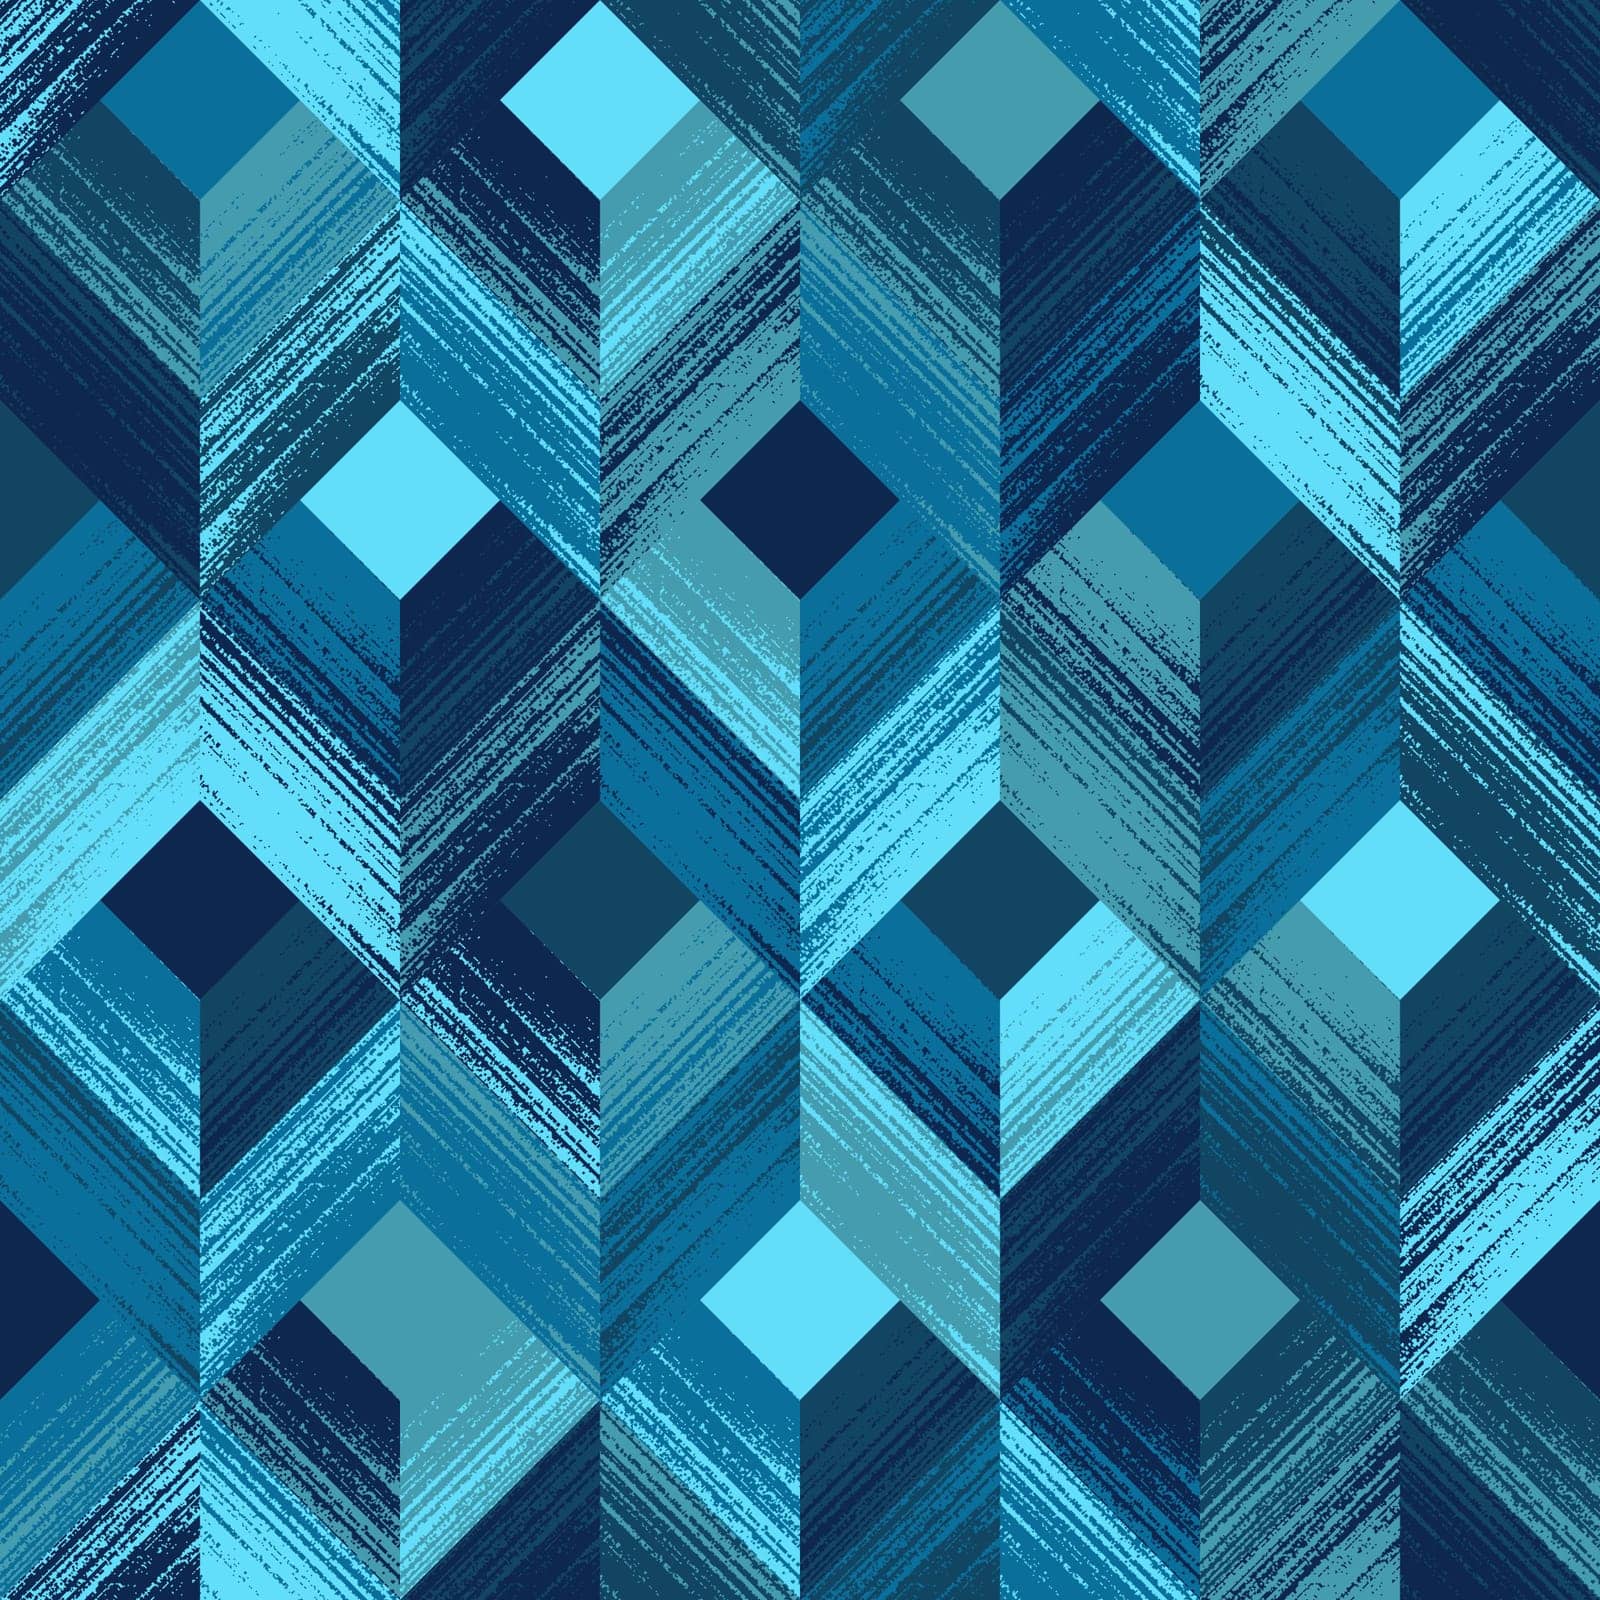 Abstract Geometric Seamless Pattern of Textured Squares and Chevrons Chaotically Colored in Blue Cyan. Fashionable Design for Wallpapers, Wrappings, Products